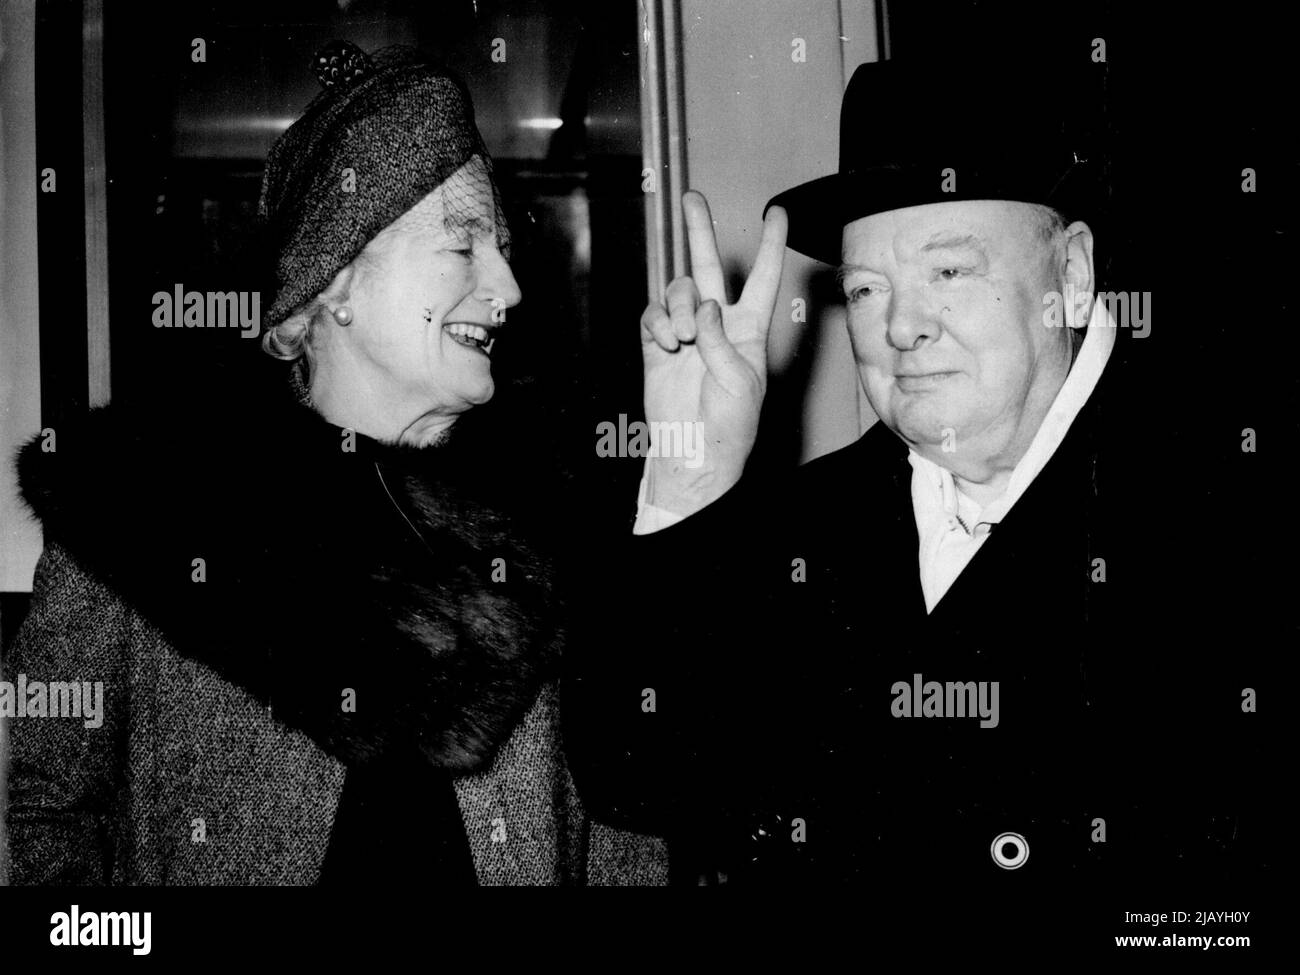 Victory In Sight? Winston Churchill's 'victory' sign is well to the fore as he leaves Padddington station, London, to-day (Wednesday) for Cardiff where he will make an election address to a huge meeting at the Ninian park football ground. With him is Mrs. Churchill. After speaking at Cardiff, Mr. Churchill will travel to Devonport to speak on behalf of his son, Randolph. February 08, 1950. (Photo by Reuterphoto). Stock Photo